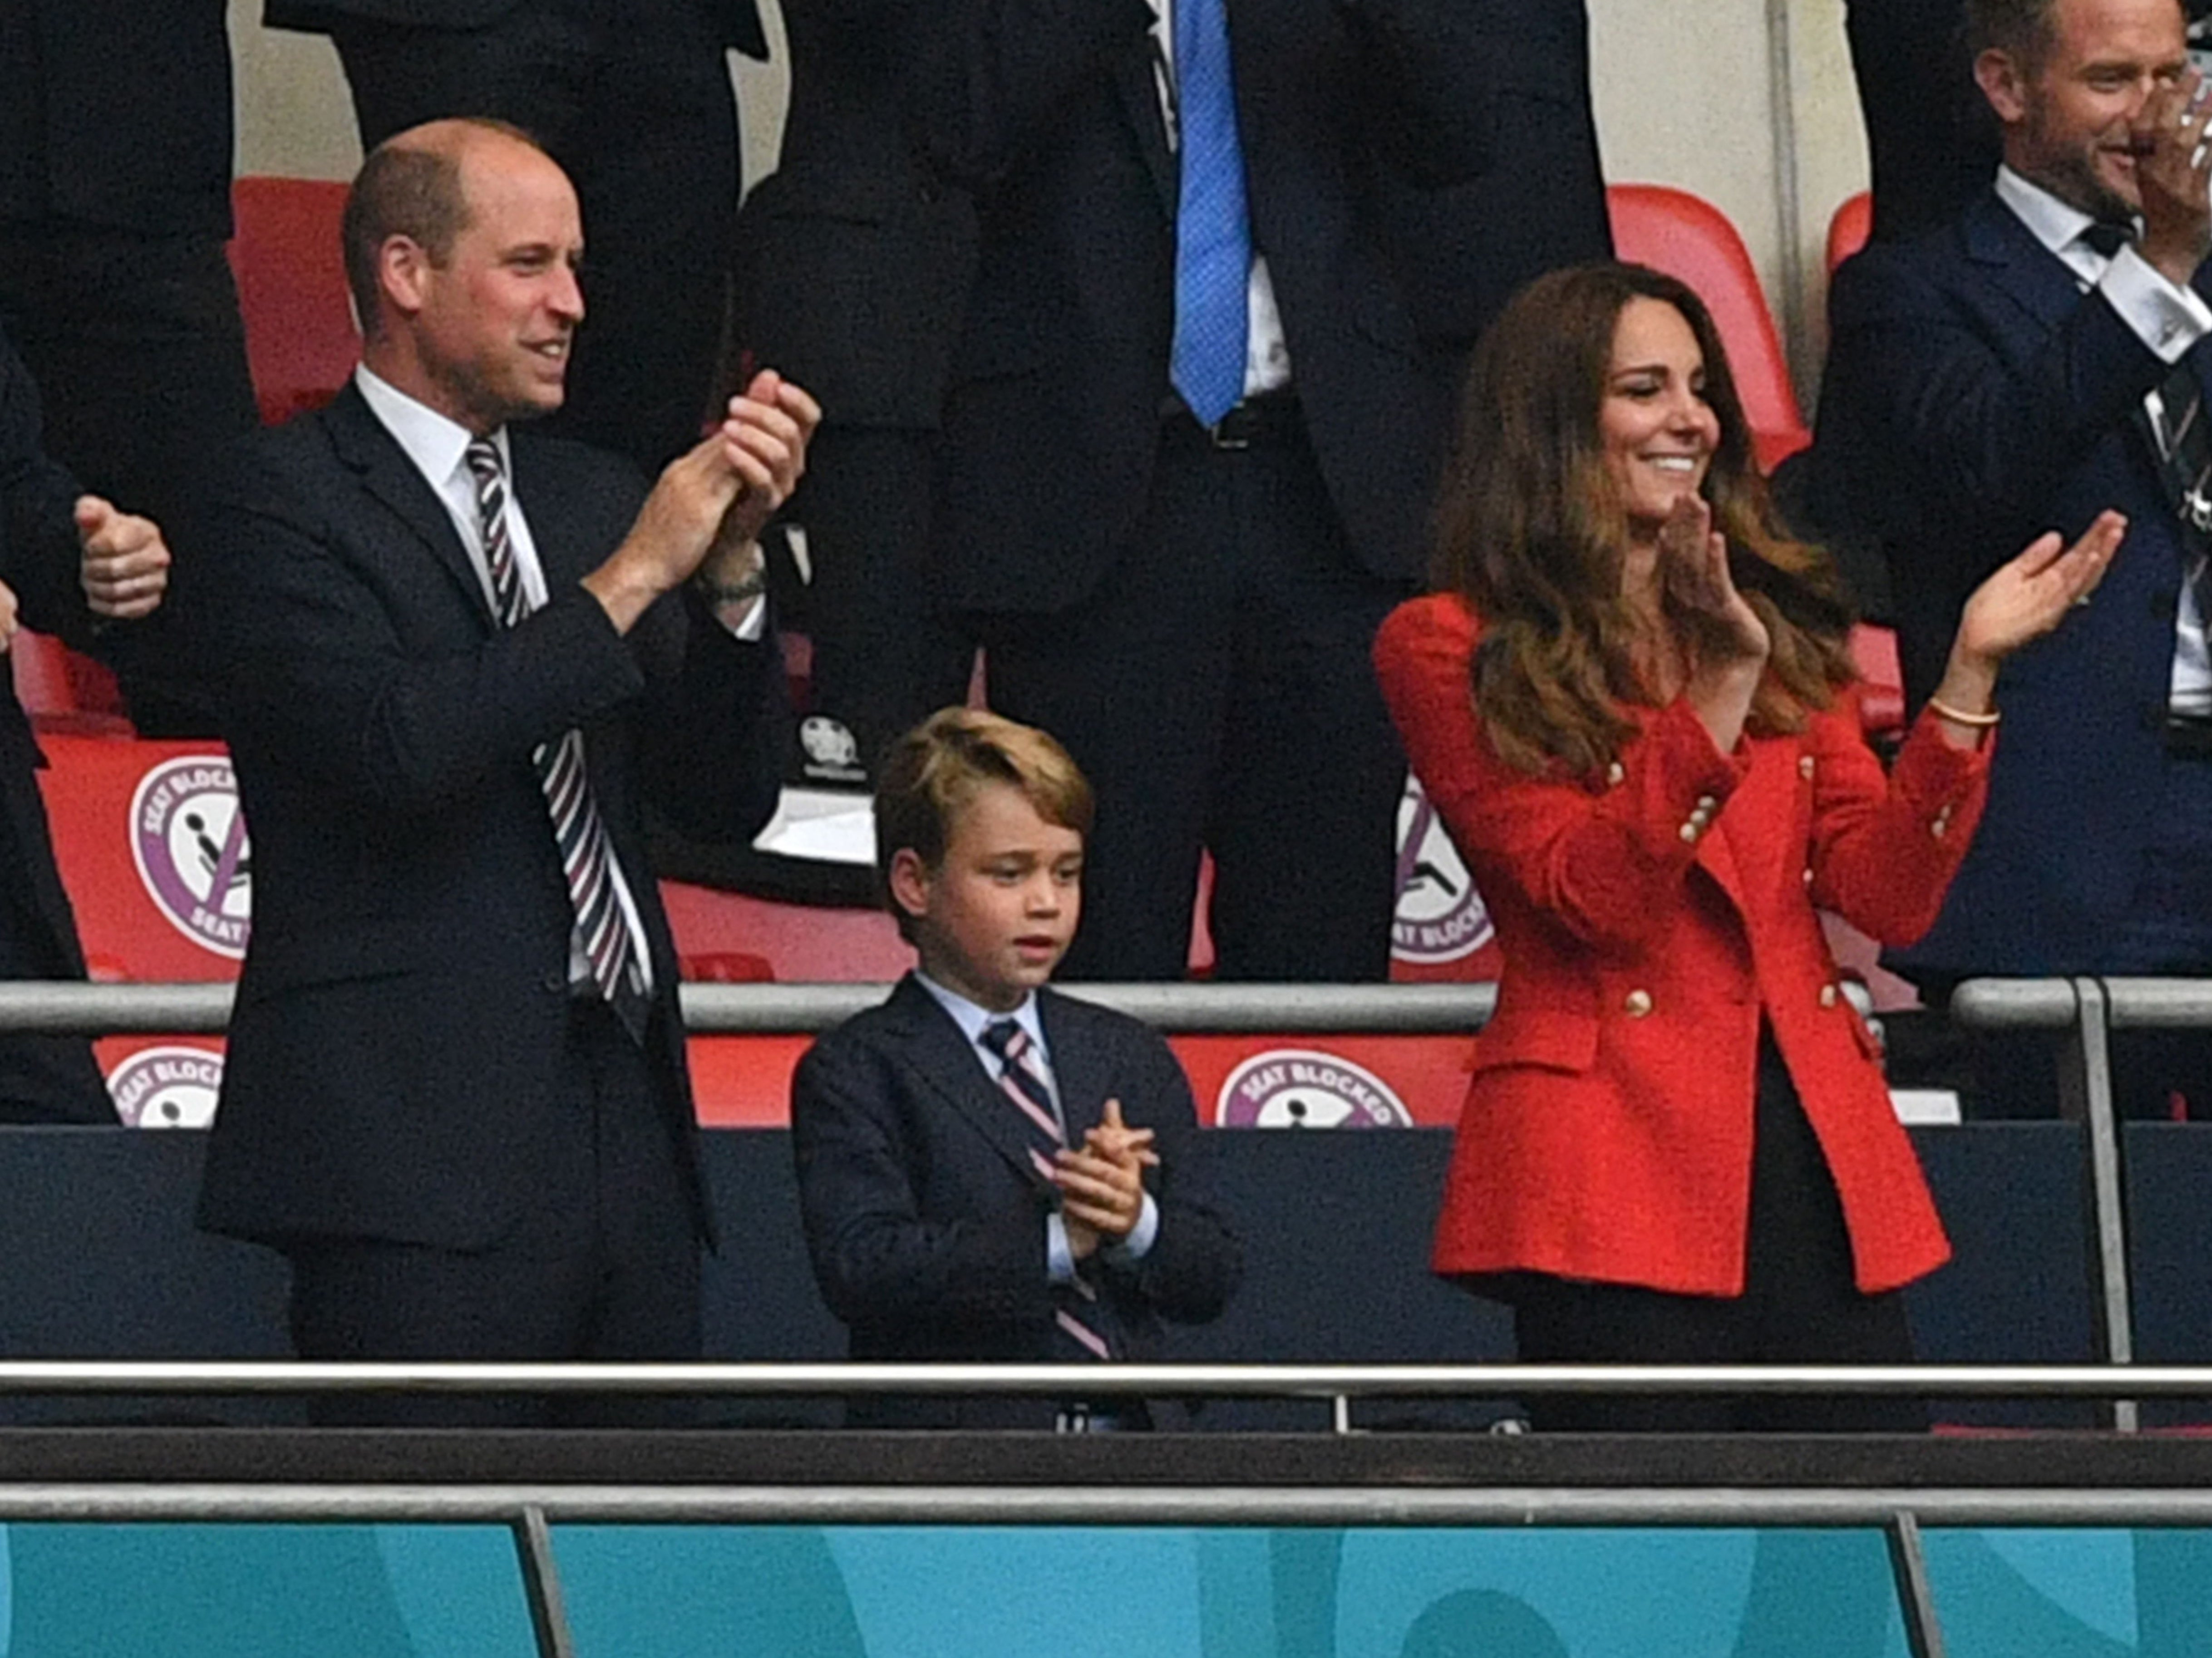 Prince William, Prince George, and the Duchess of Cambridge celebrate the first goal in the UEFA EURO 2020 match between England and Germany